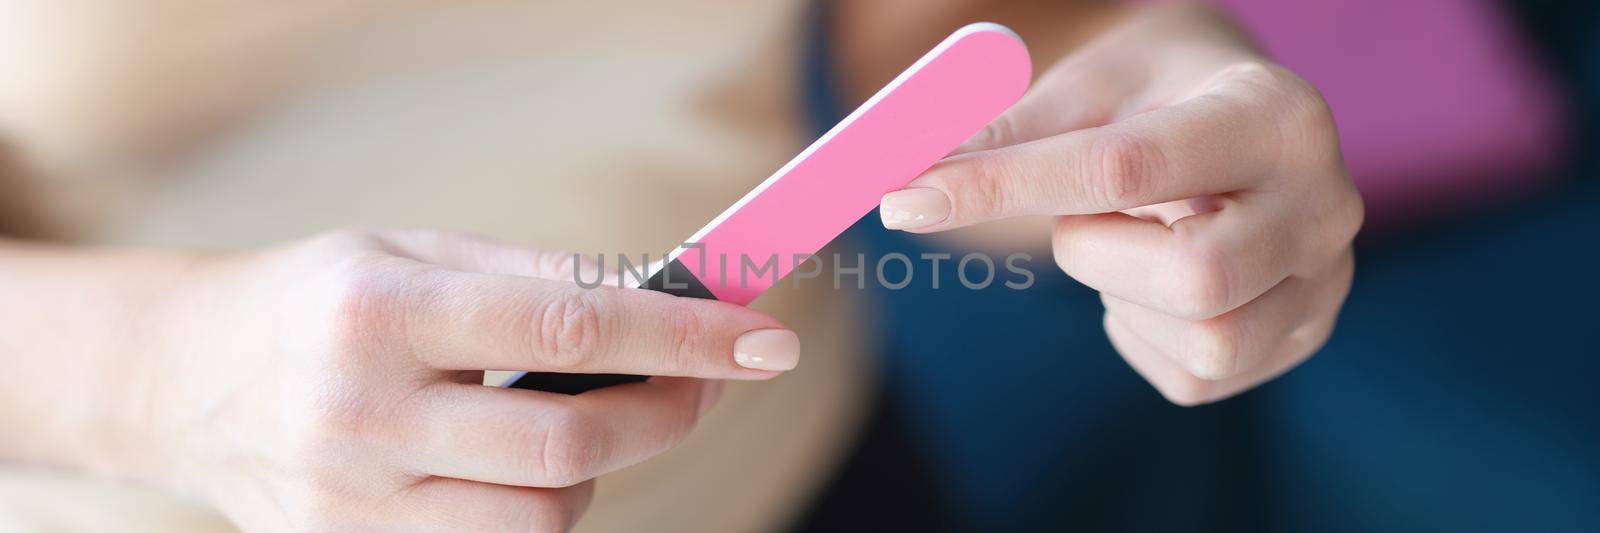 Woman holding a nail file, female hands with manicure, close-up. Correction of nails, professional hand care